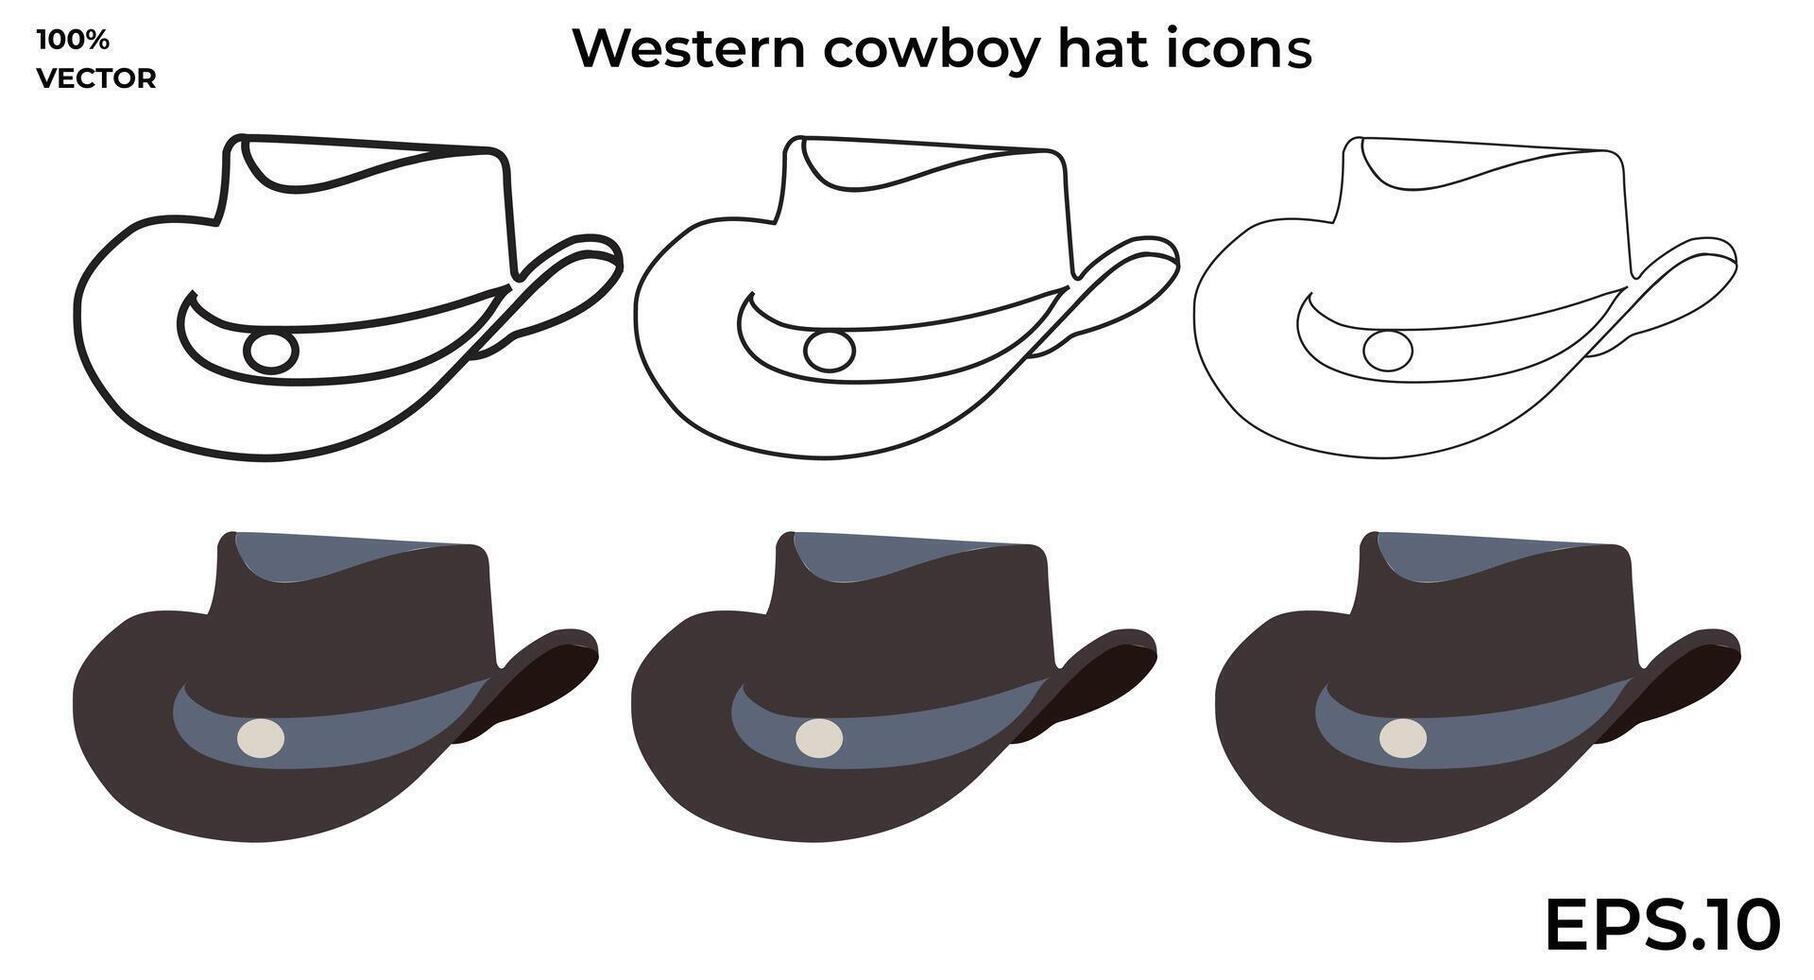 A set of outline and vector black Western cowboy hat icons